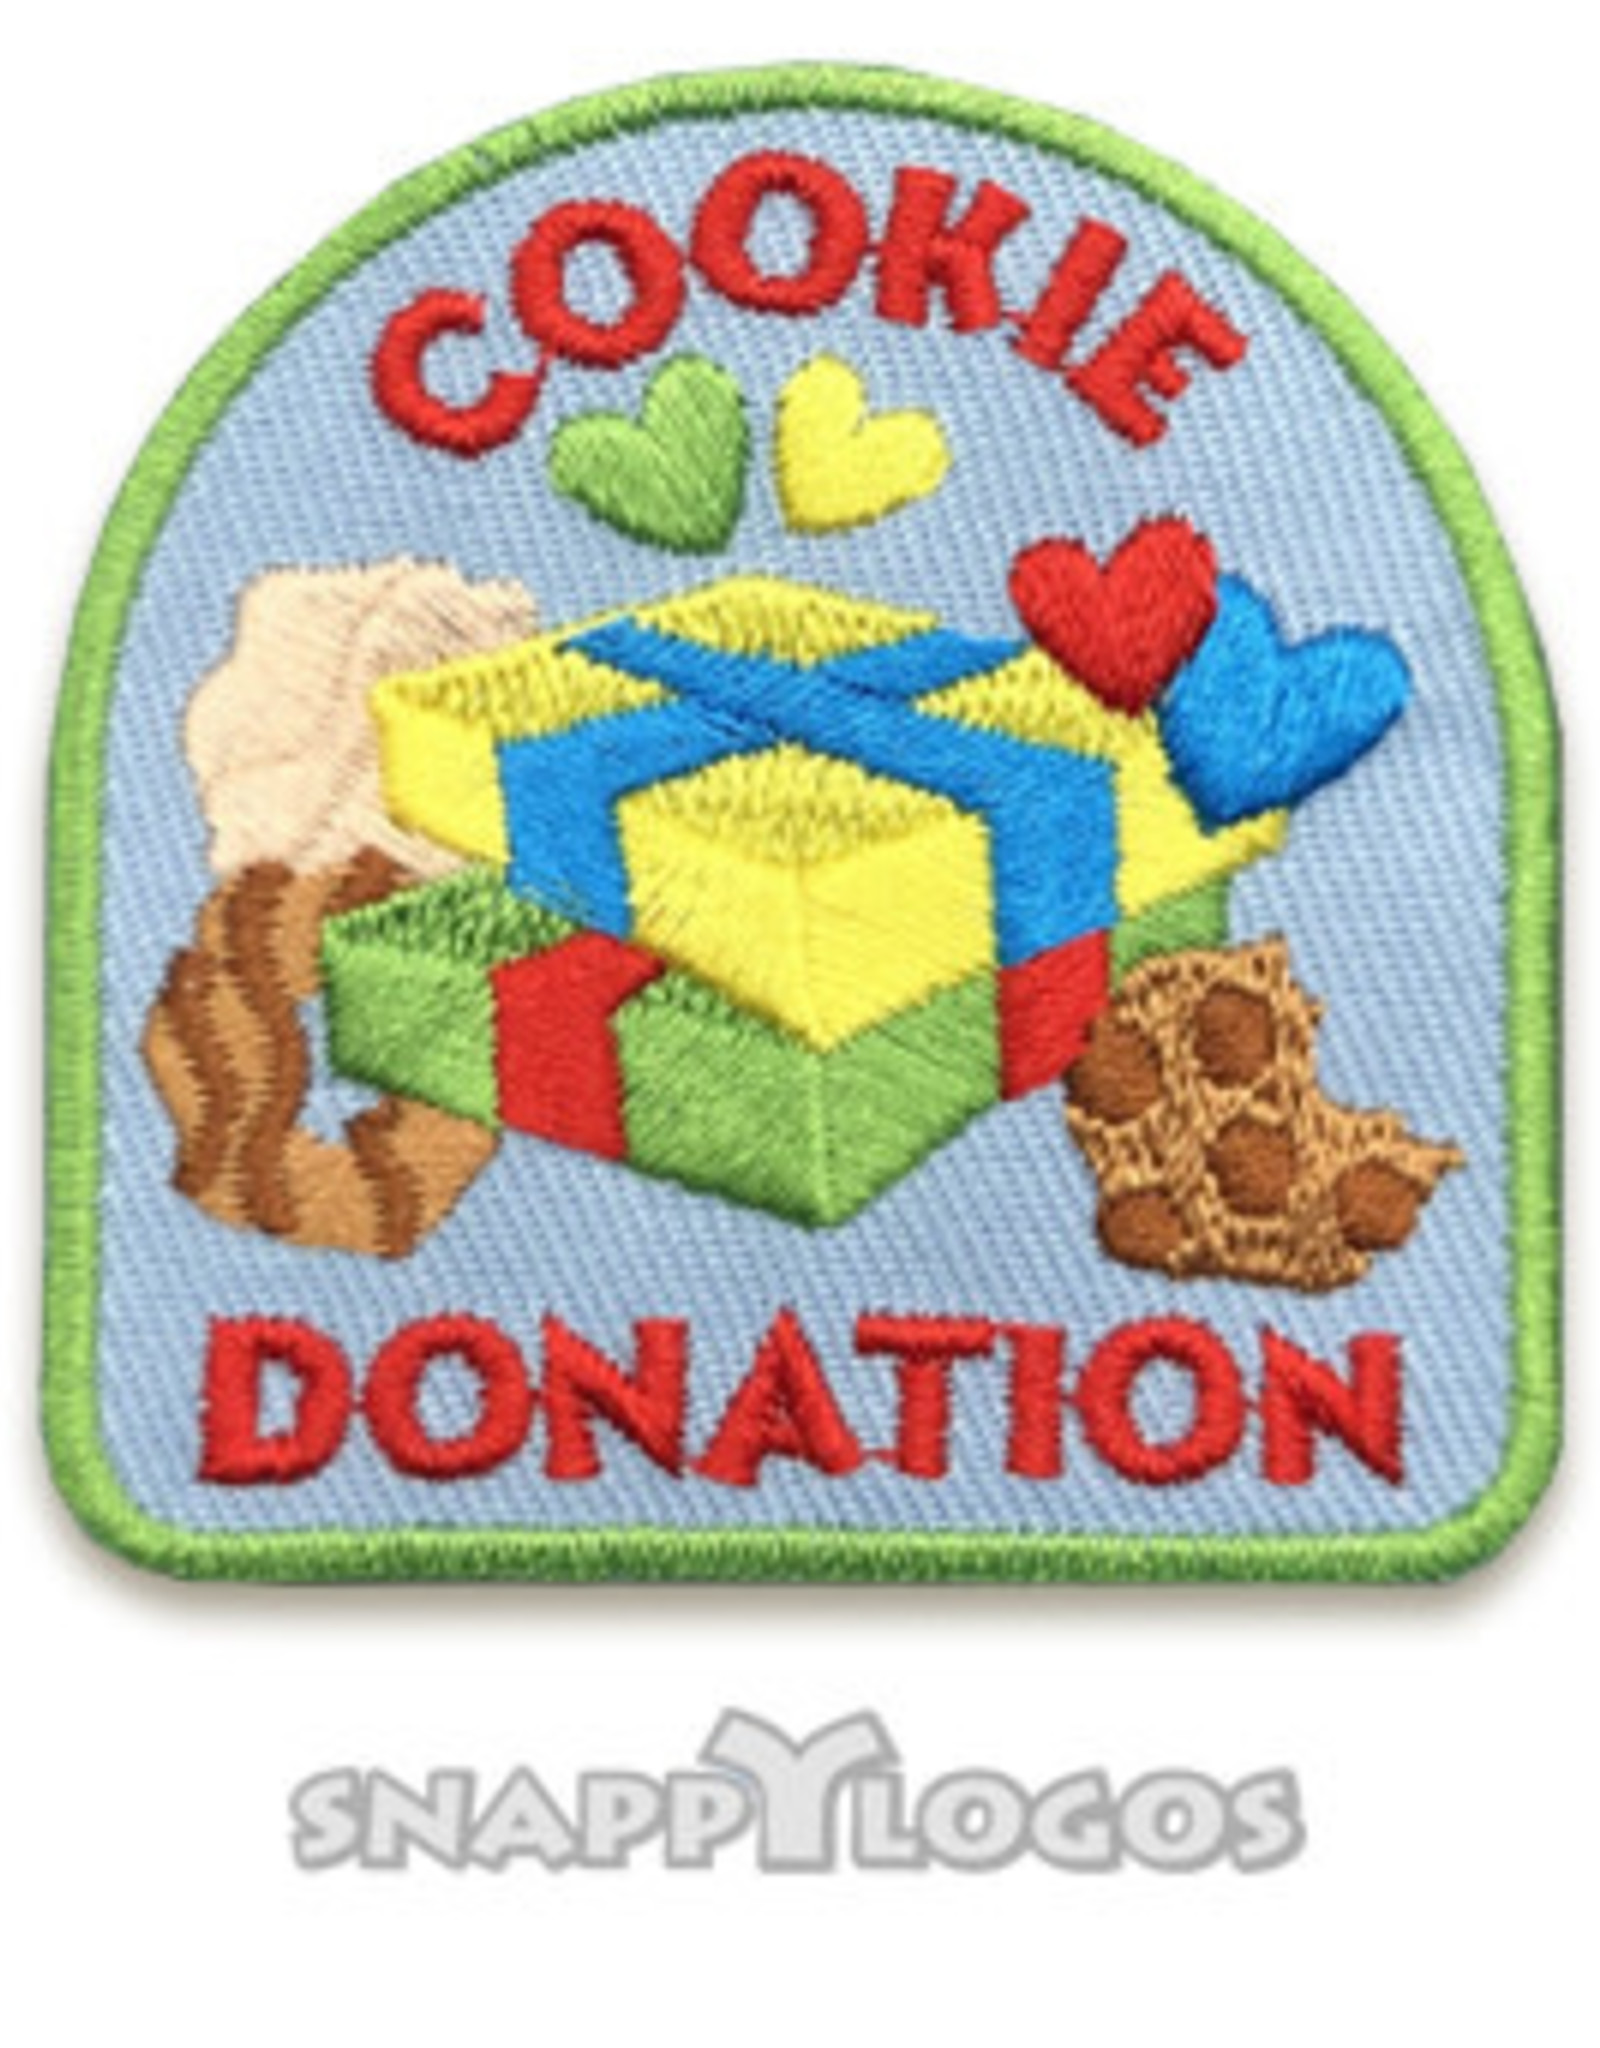 snappylogos Cookie Donation w/wrapped gifts (9233)